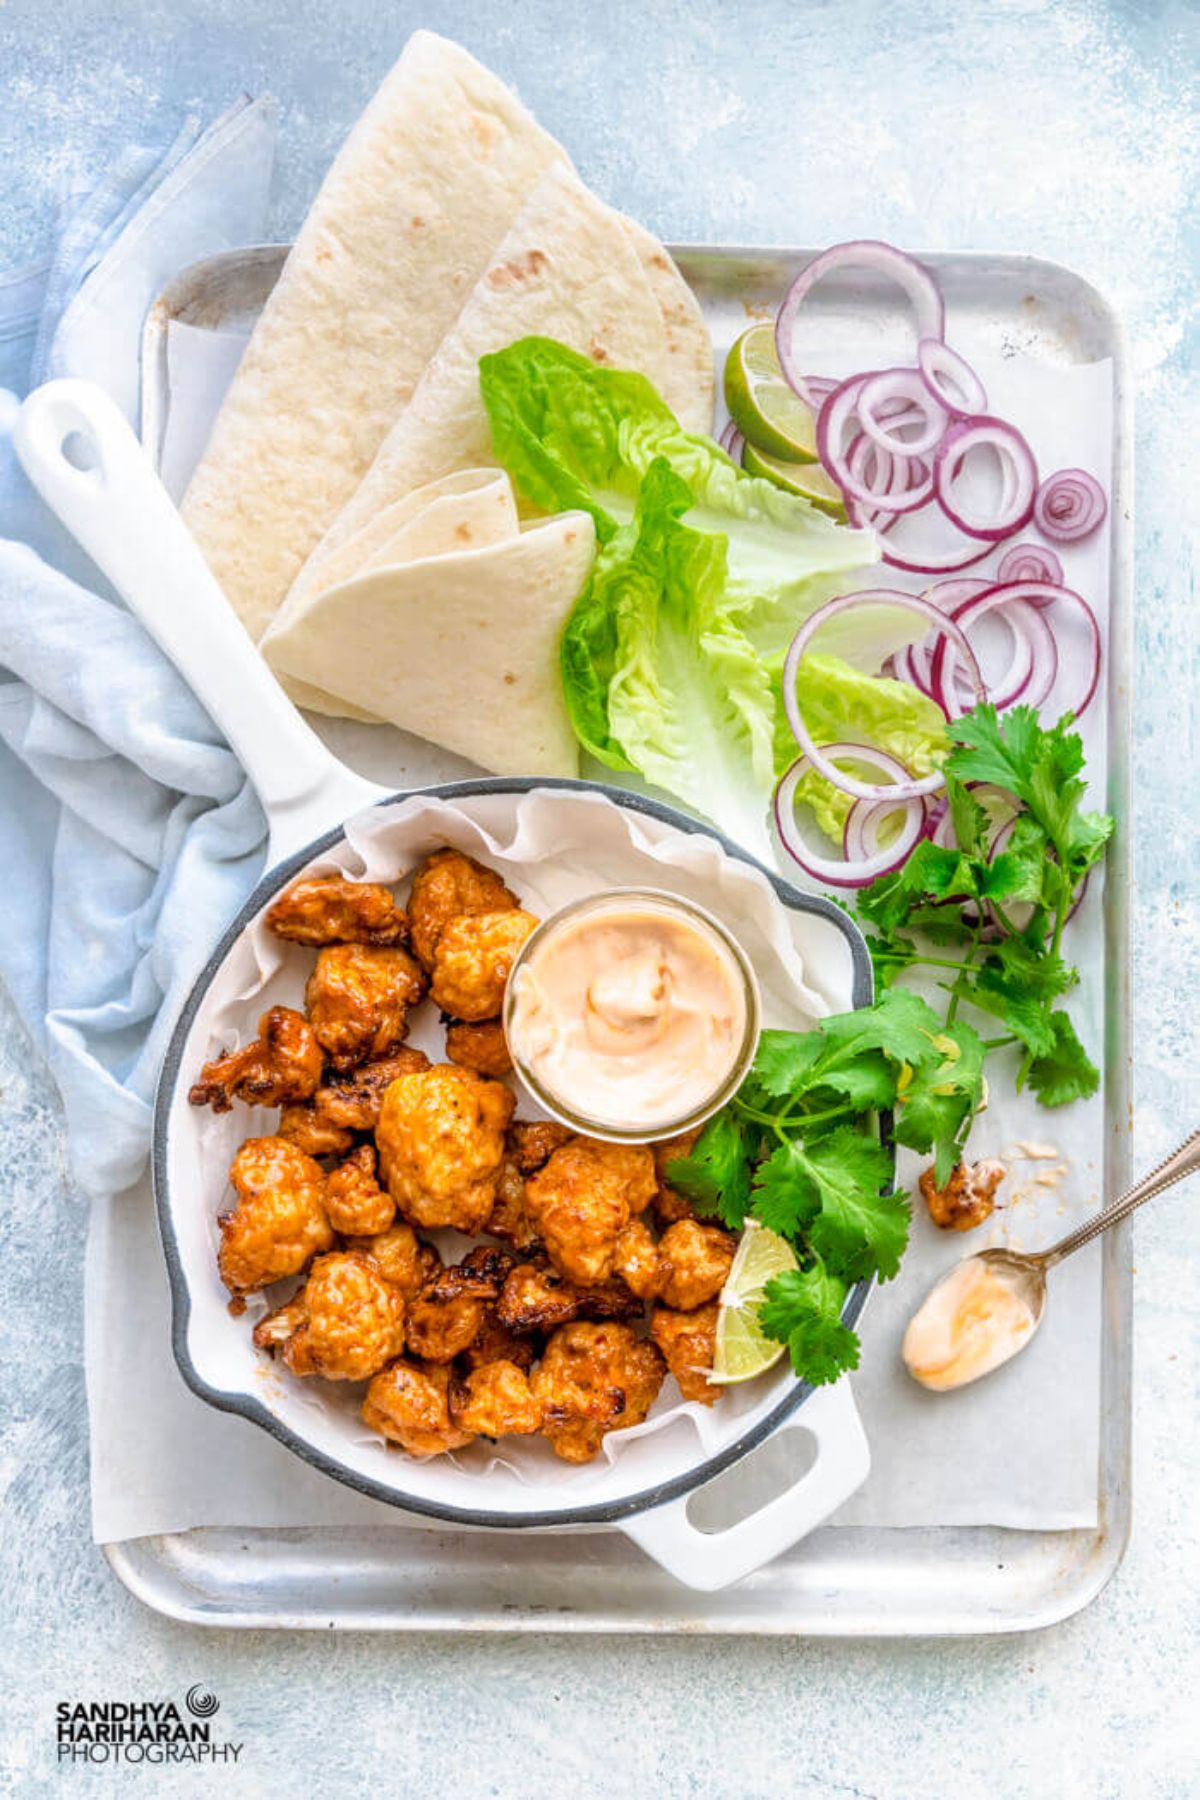 a tray laden with a cast iron pan full of cauliflower wings and dip, folded tortilla wraps, and salad